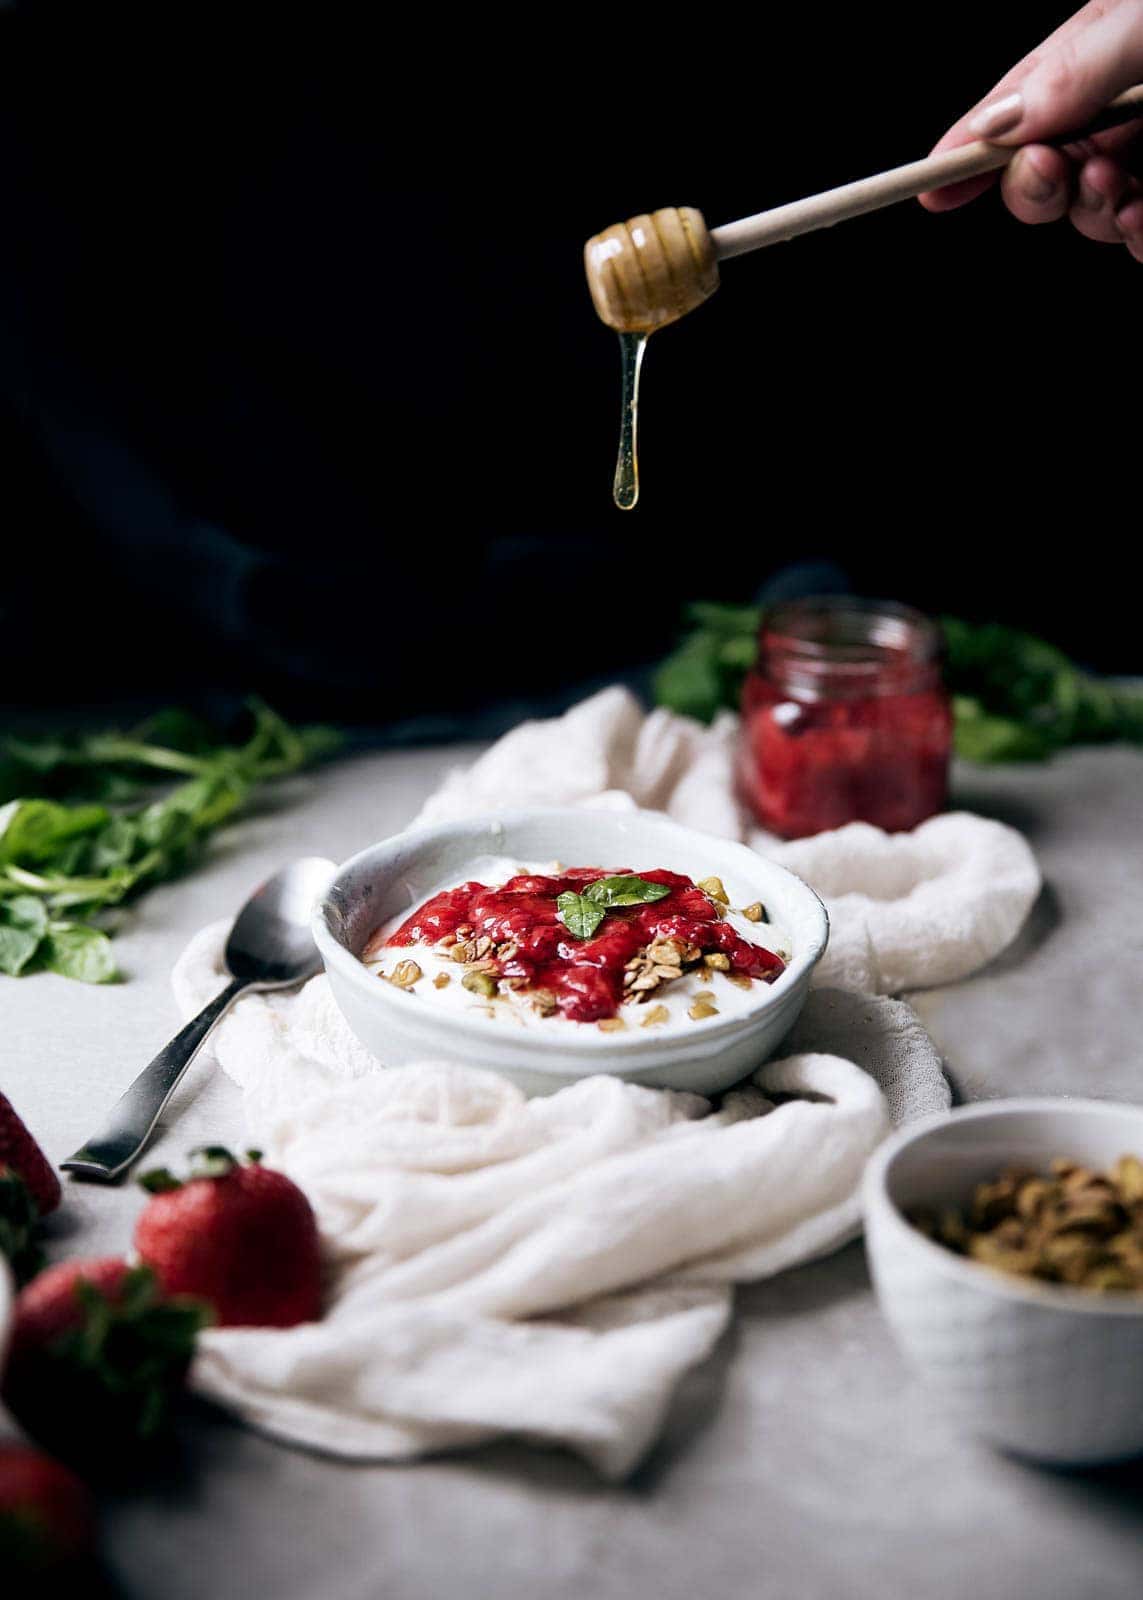 Simple and unique with only a touch of refined sugar, this Strawberry Basil Compote is perfect over yogurt, atop pancakes, or spread onto a piece of toast.